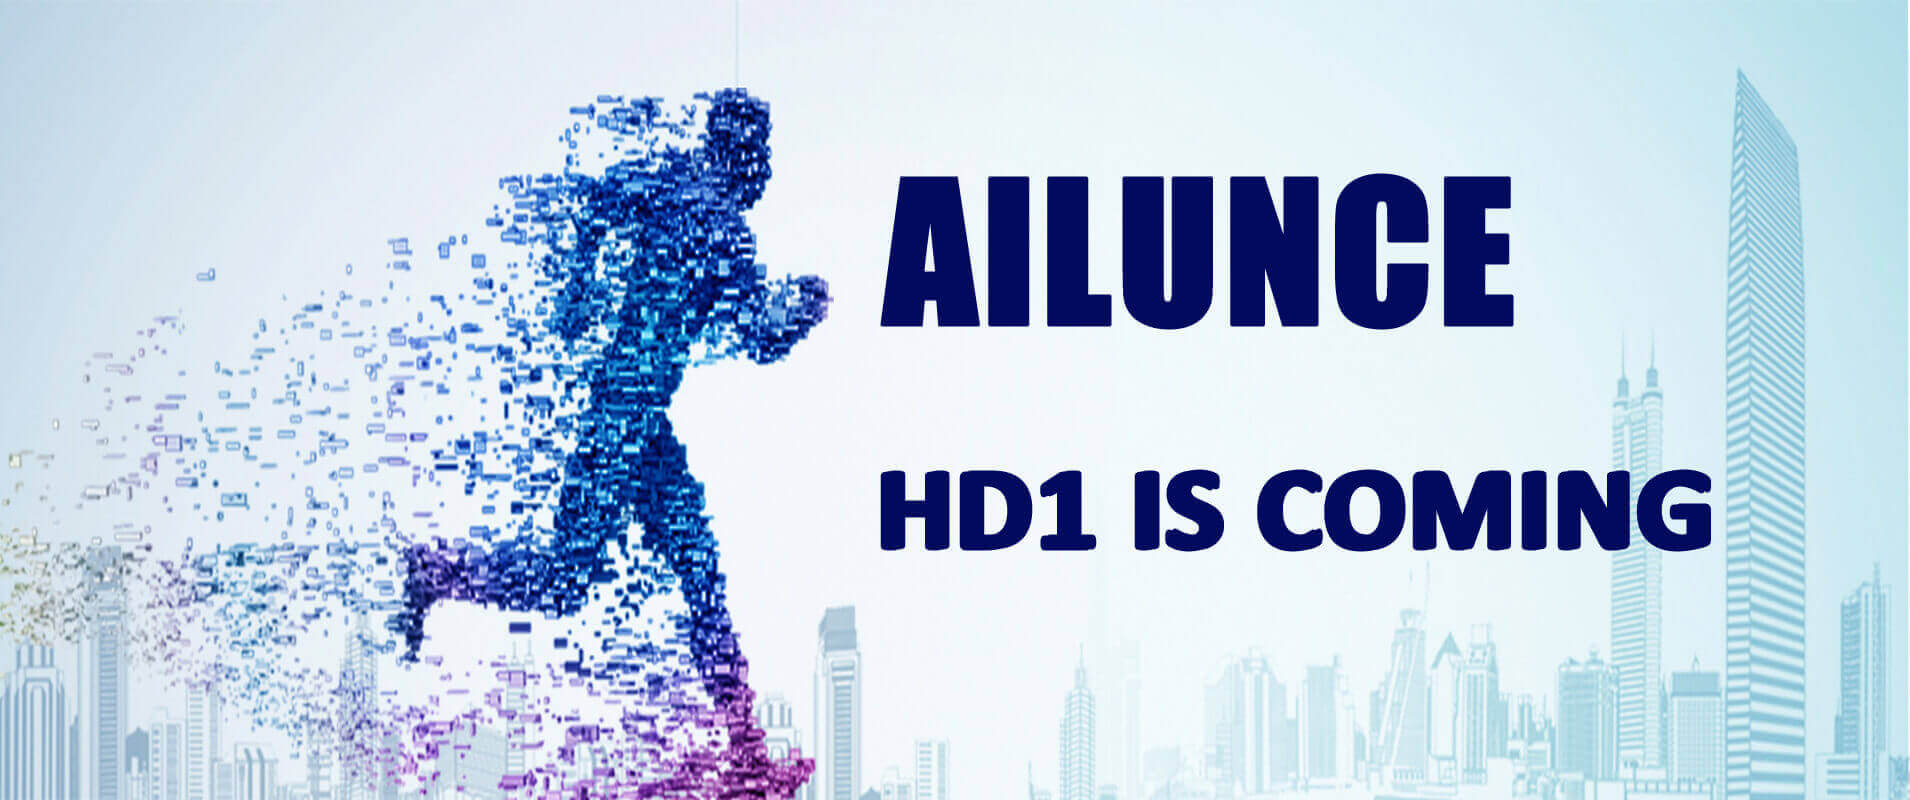 HD1-is-coming